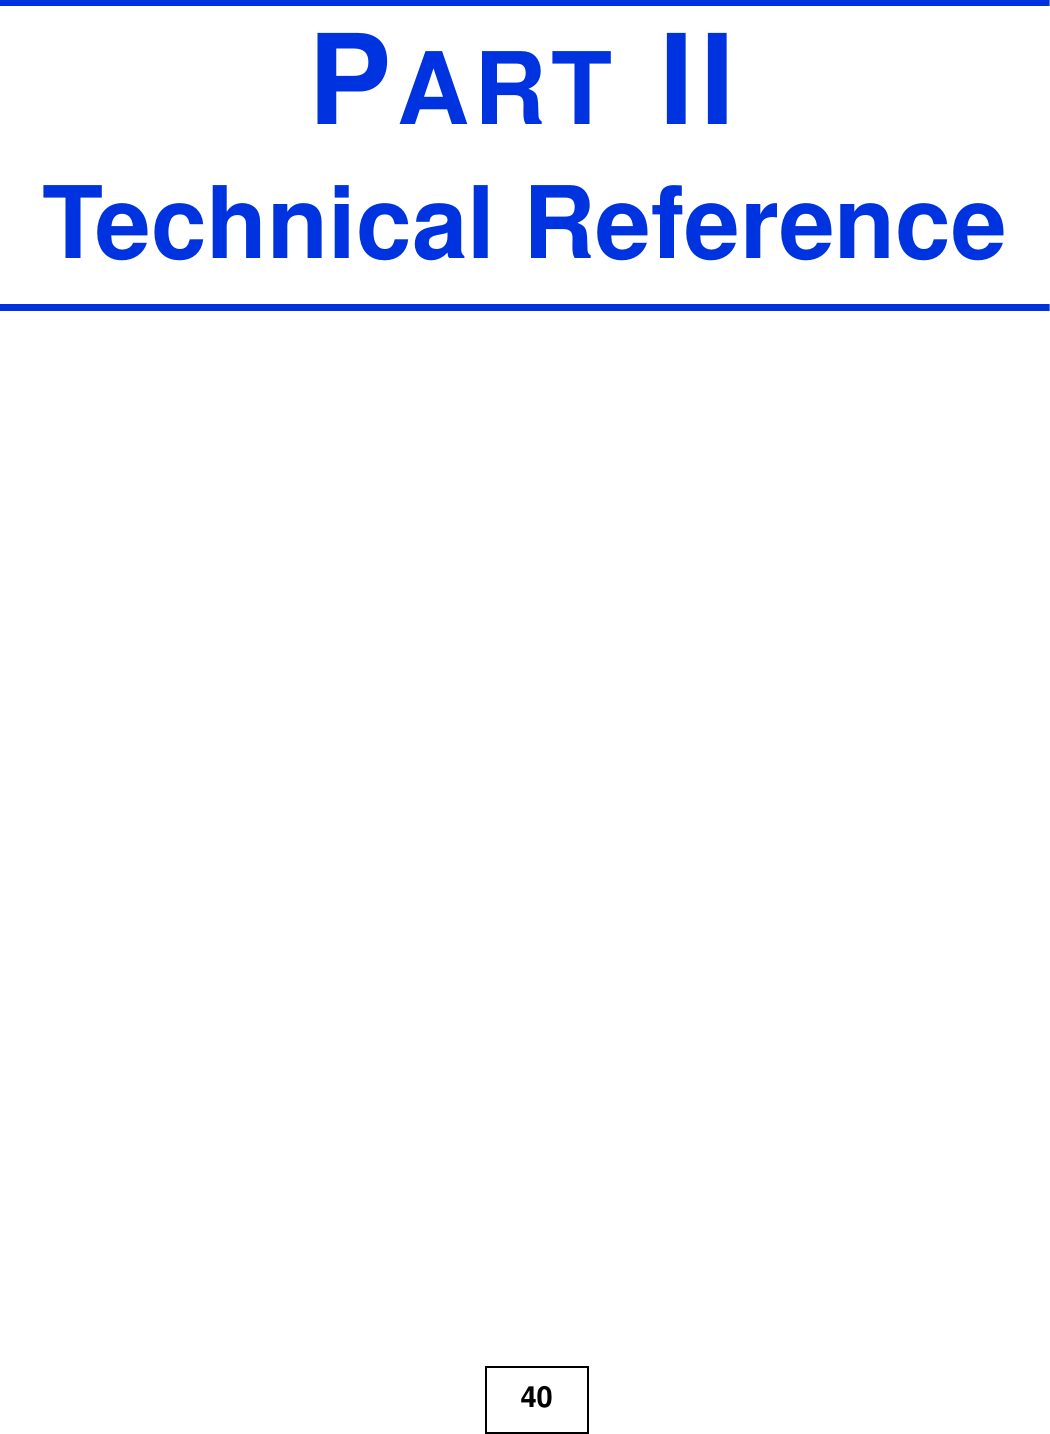 40PART IITechnical Reference